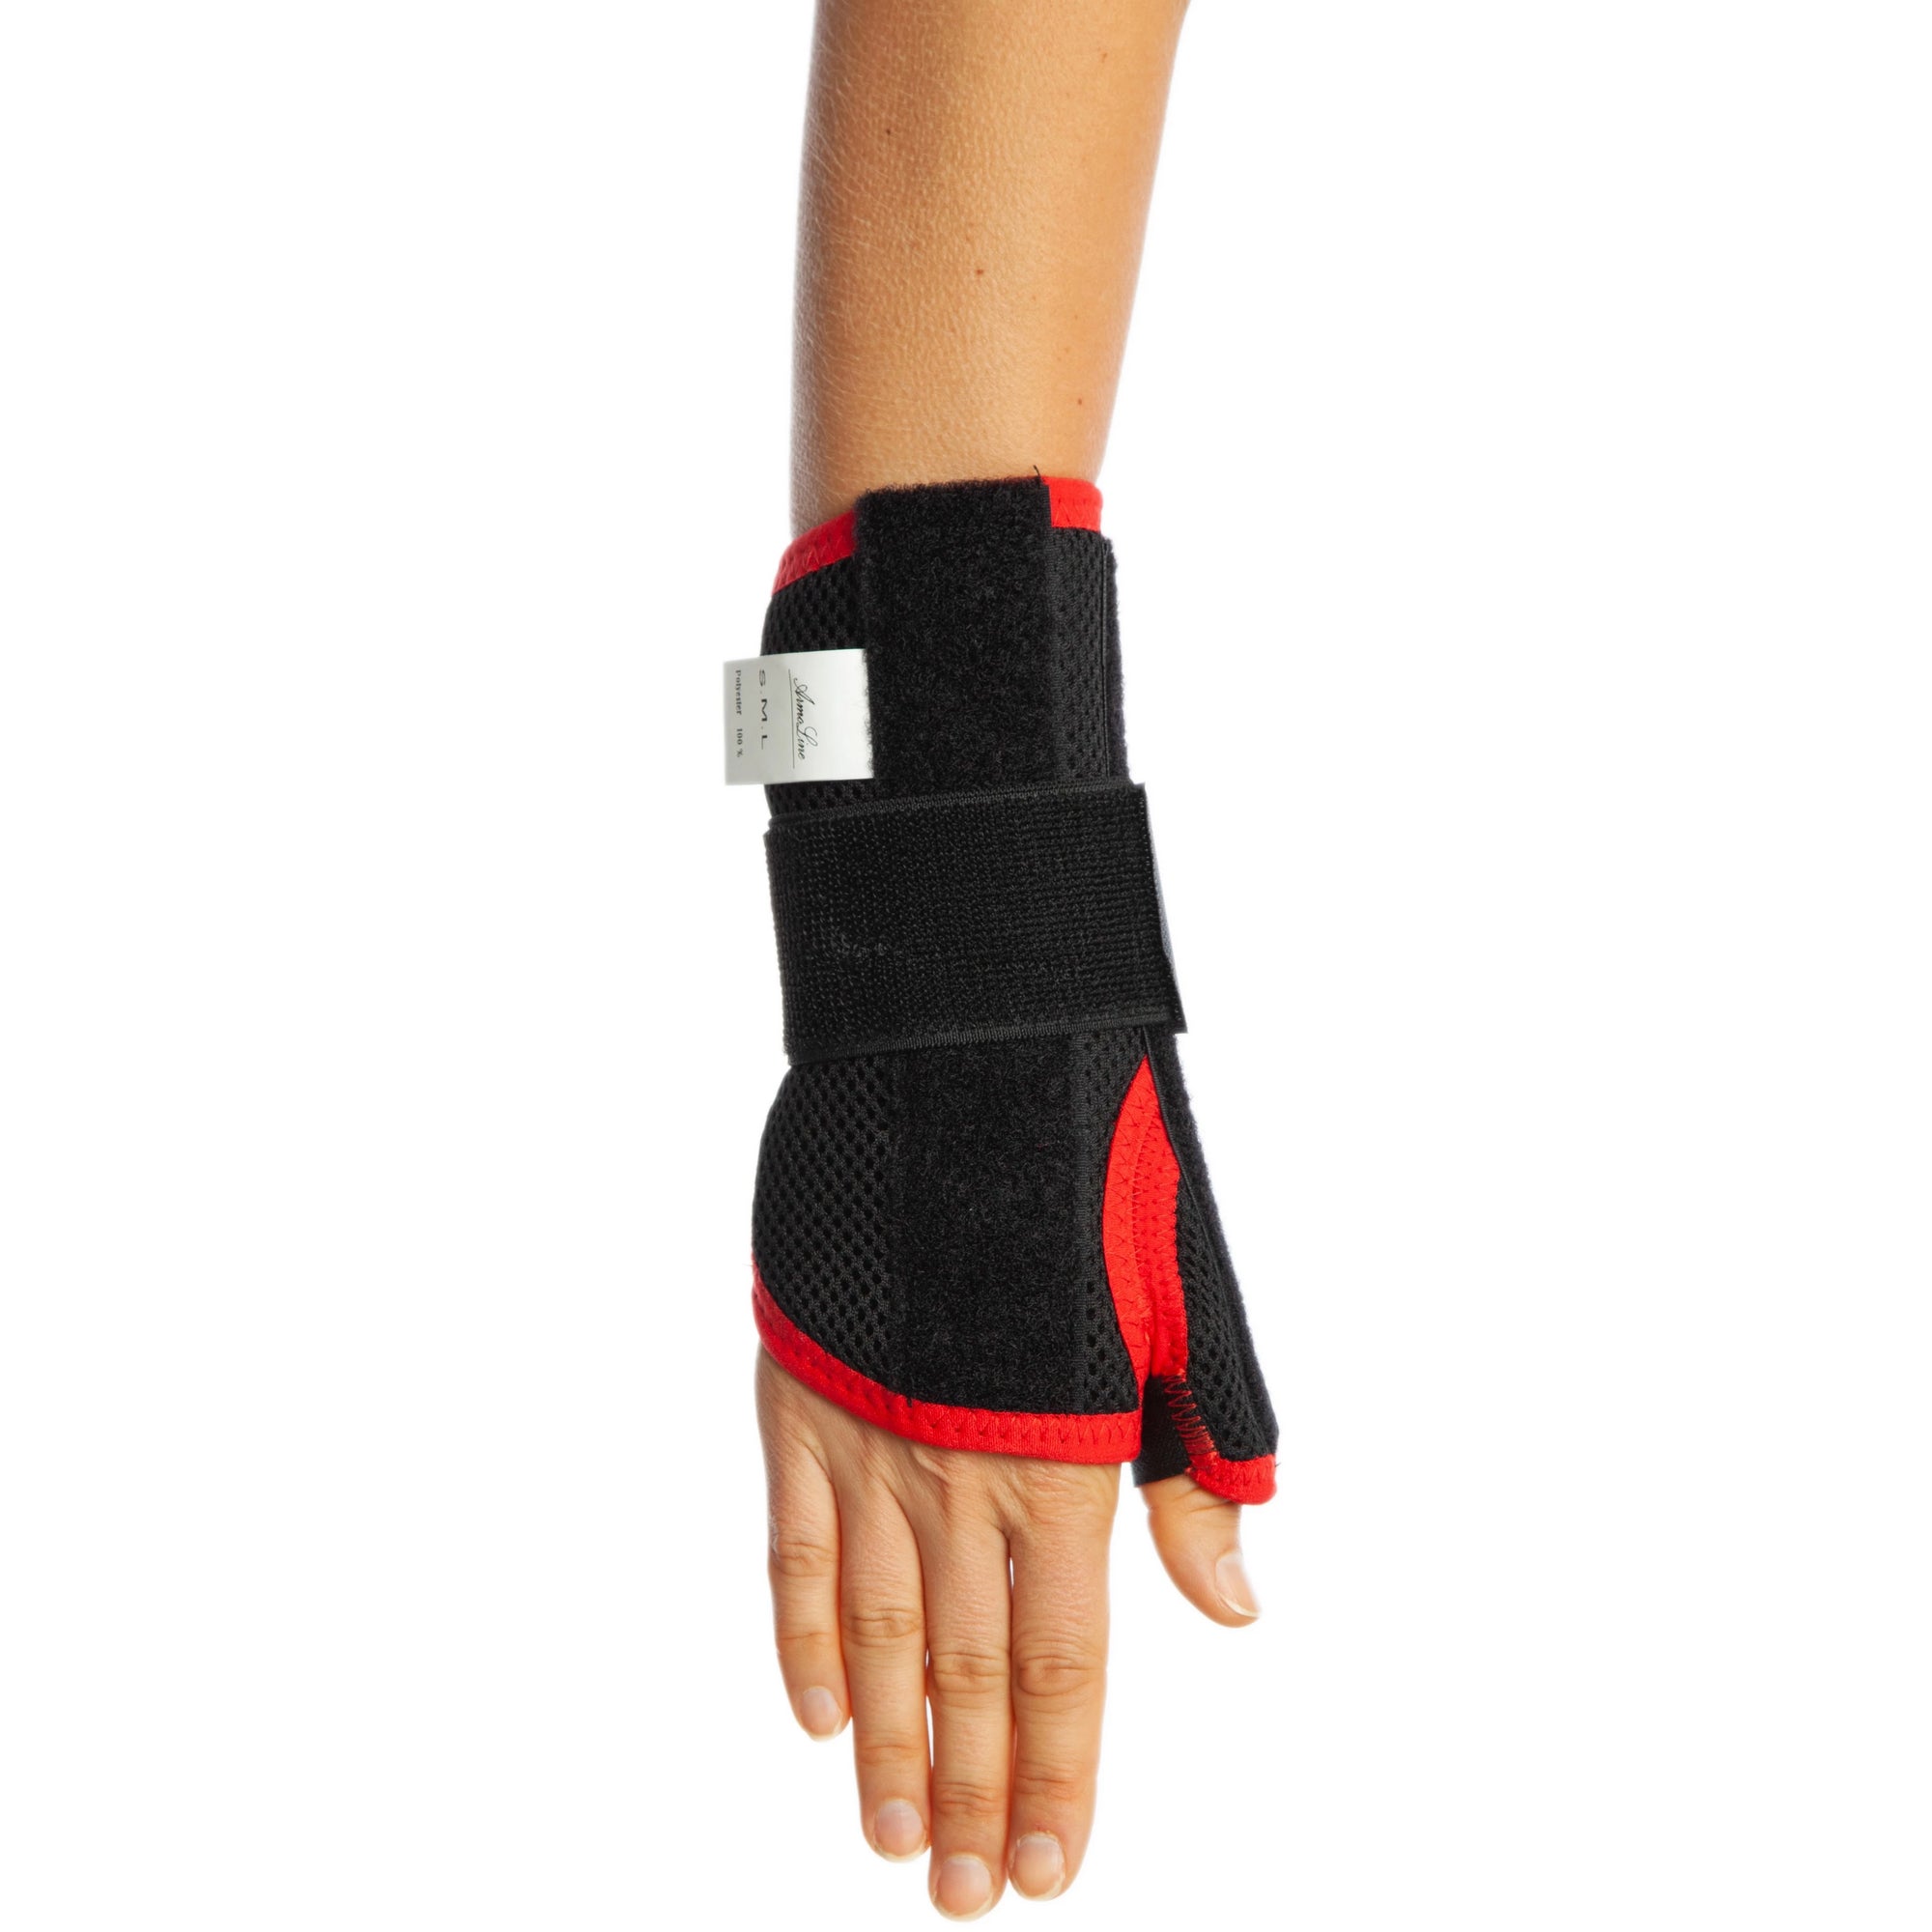 Wrist Support with Thumb Splint - Breathable Fabric